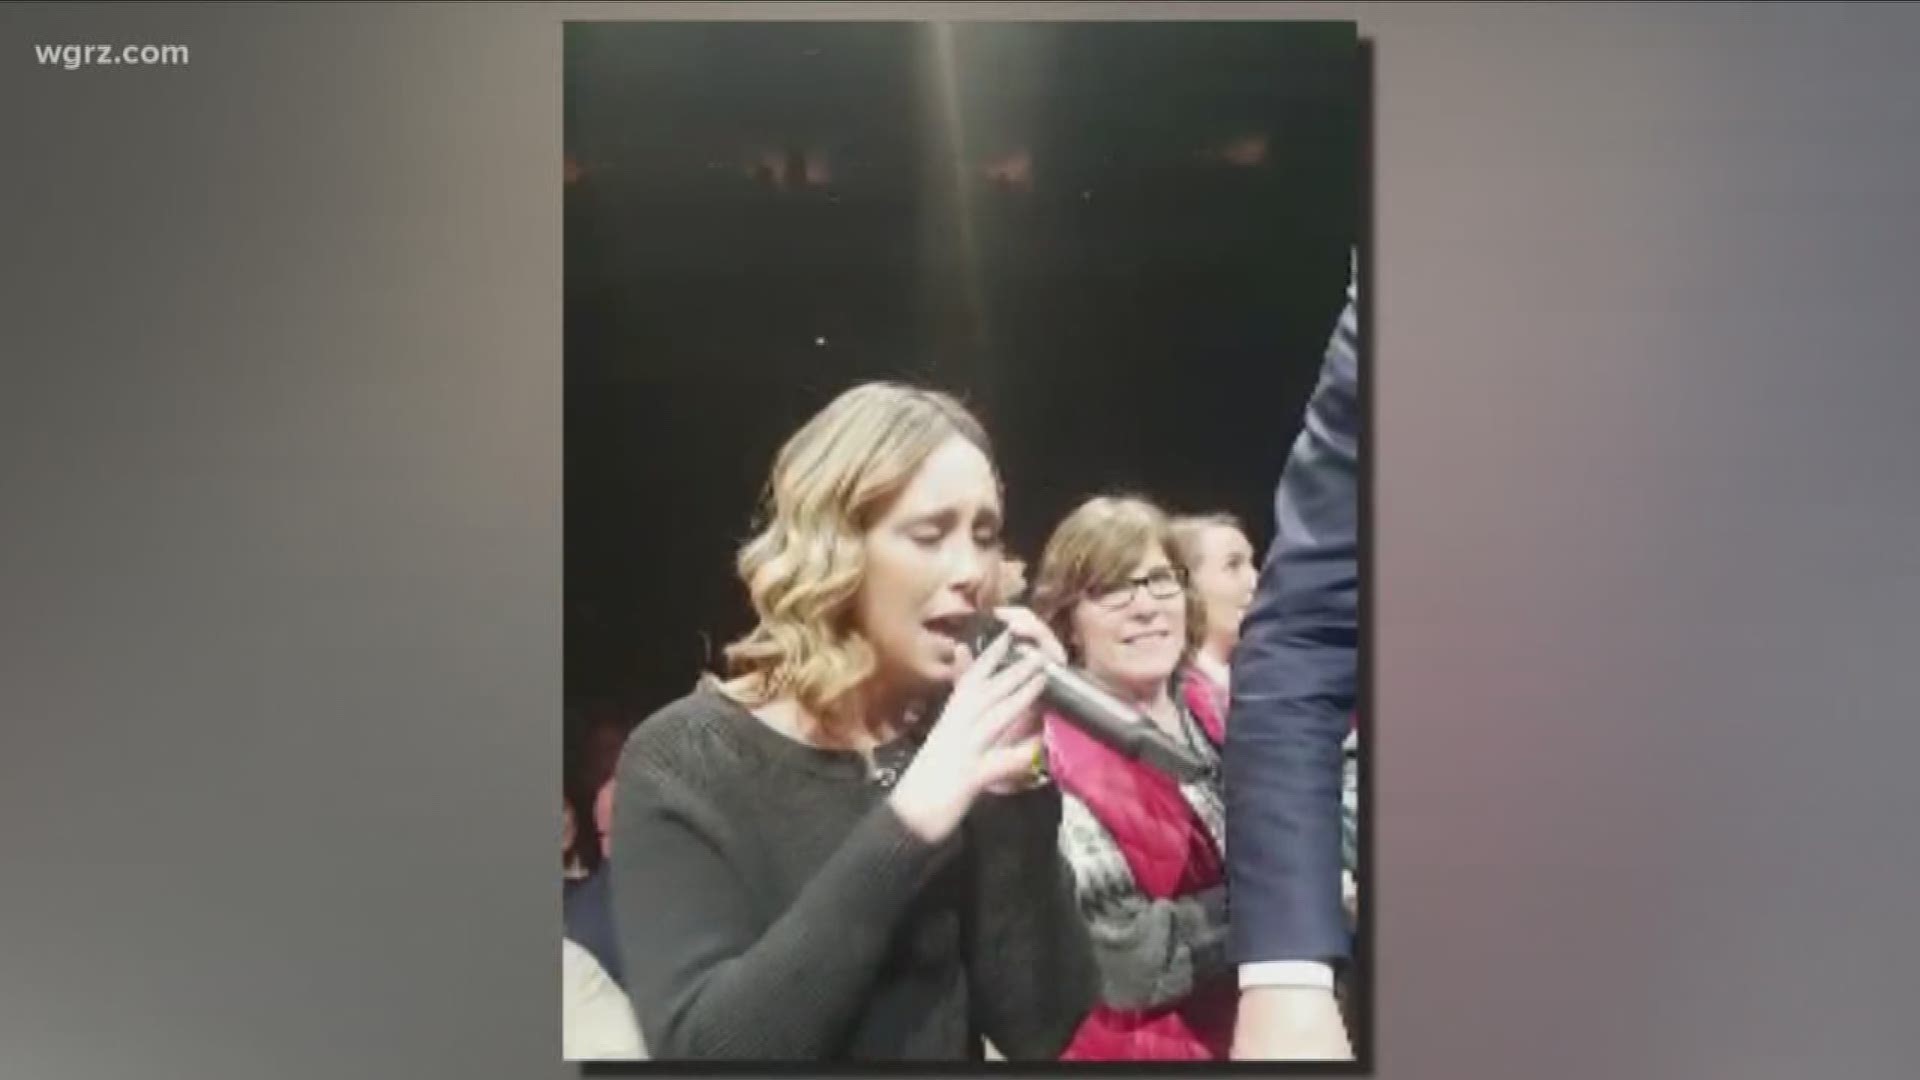 Local singer shines at Michael Buble concert